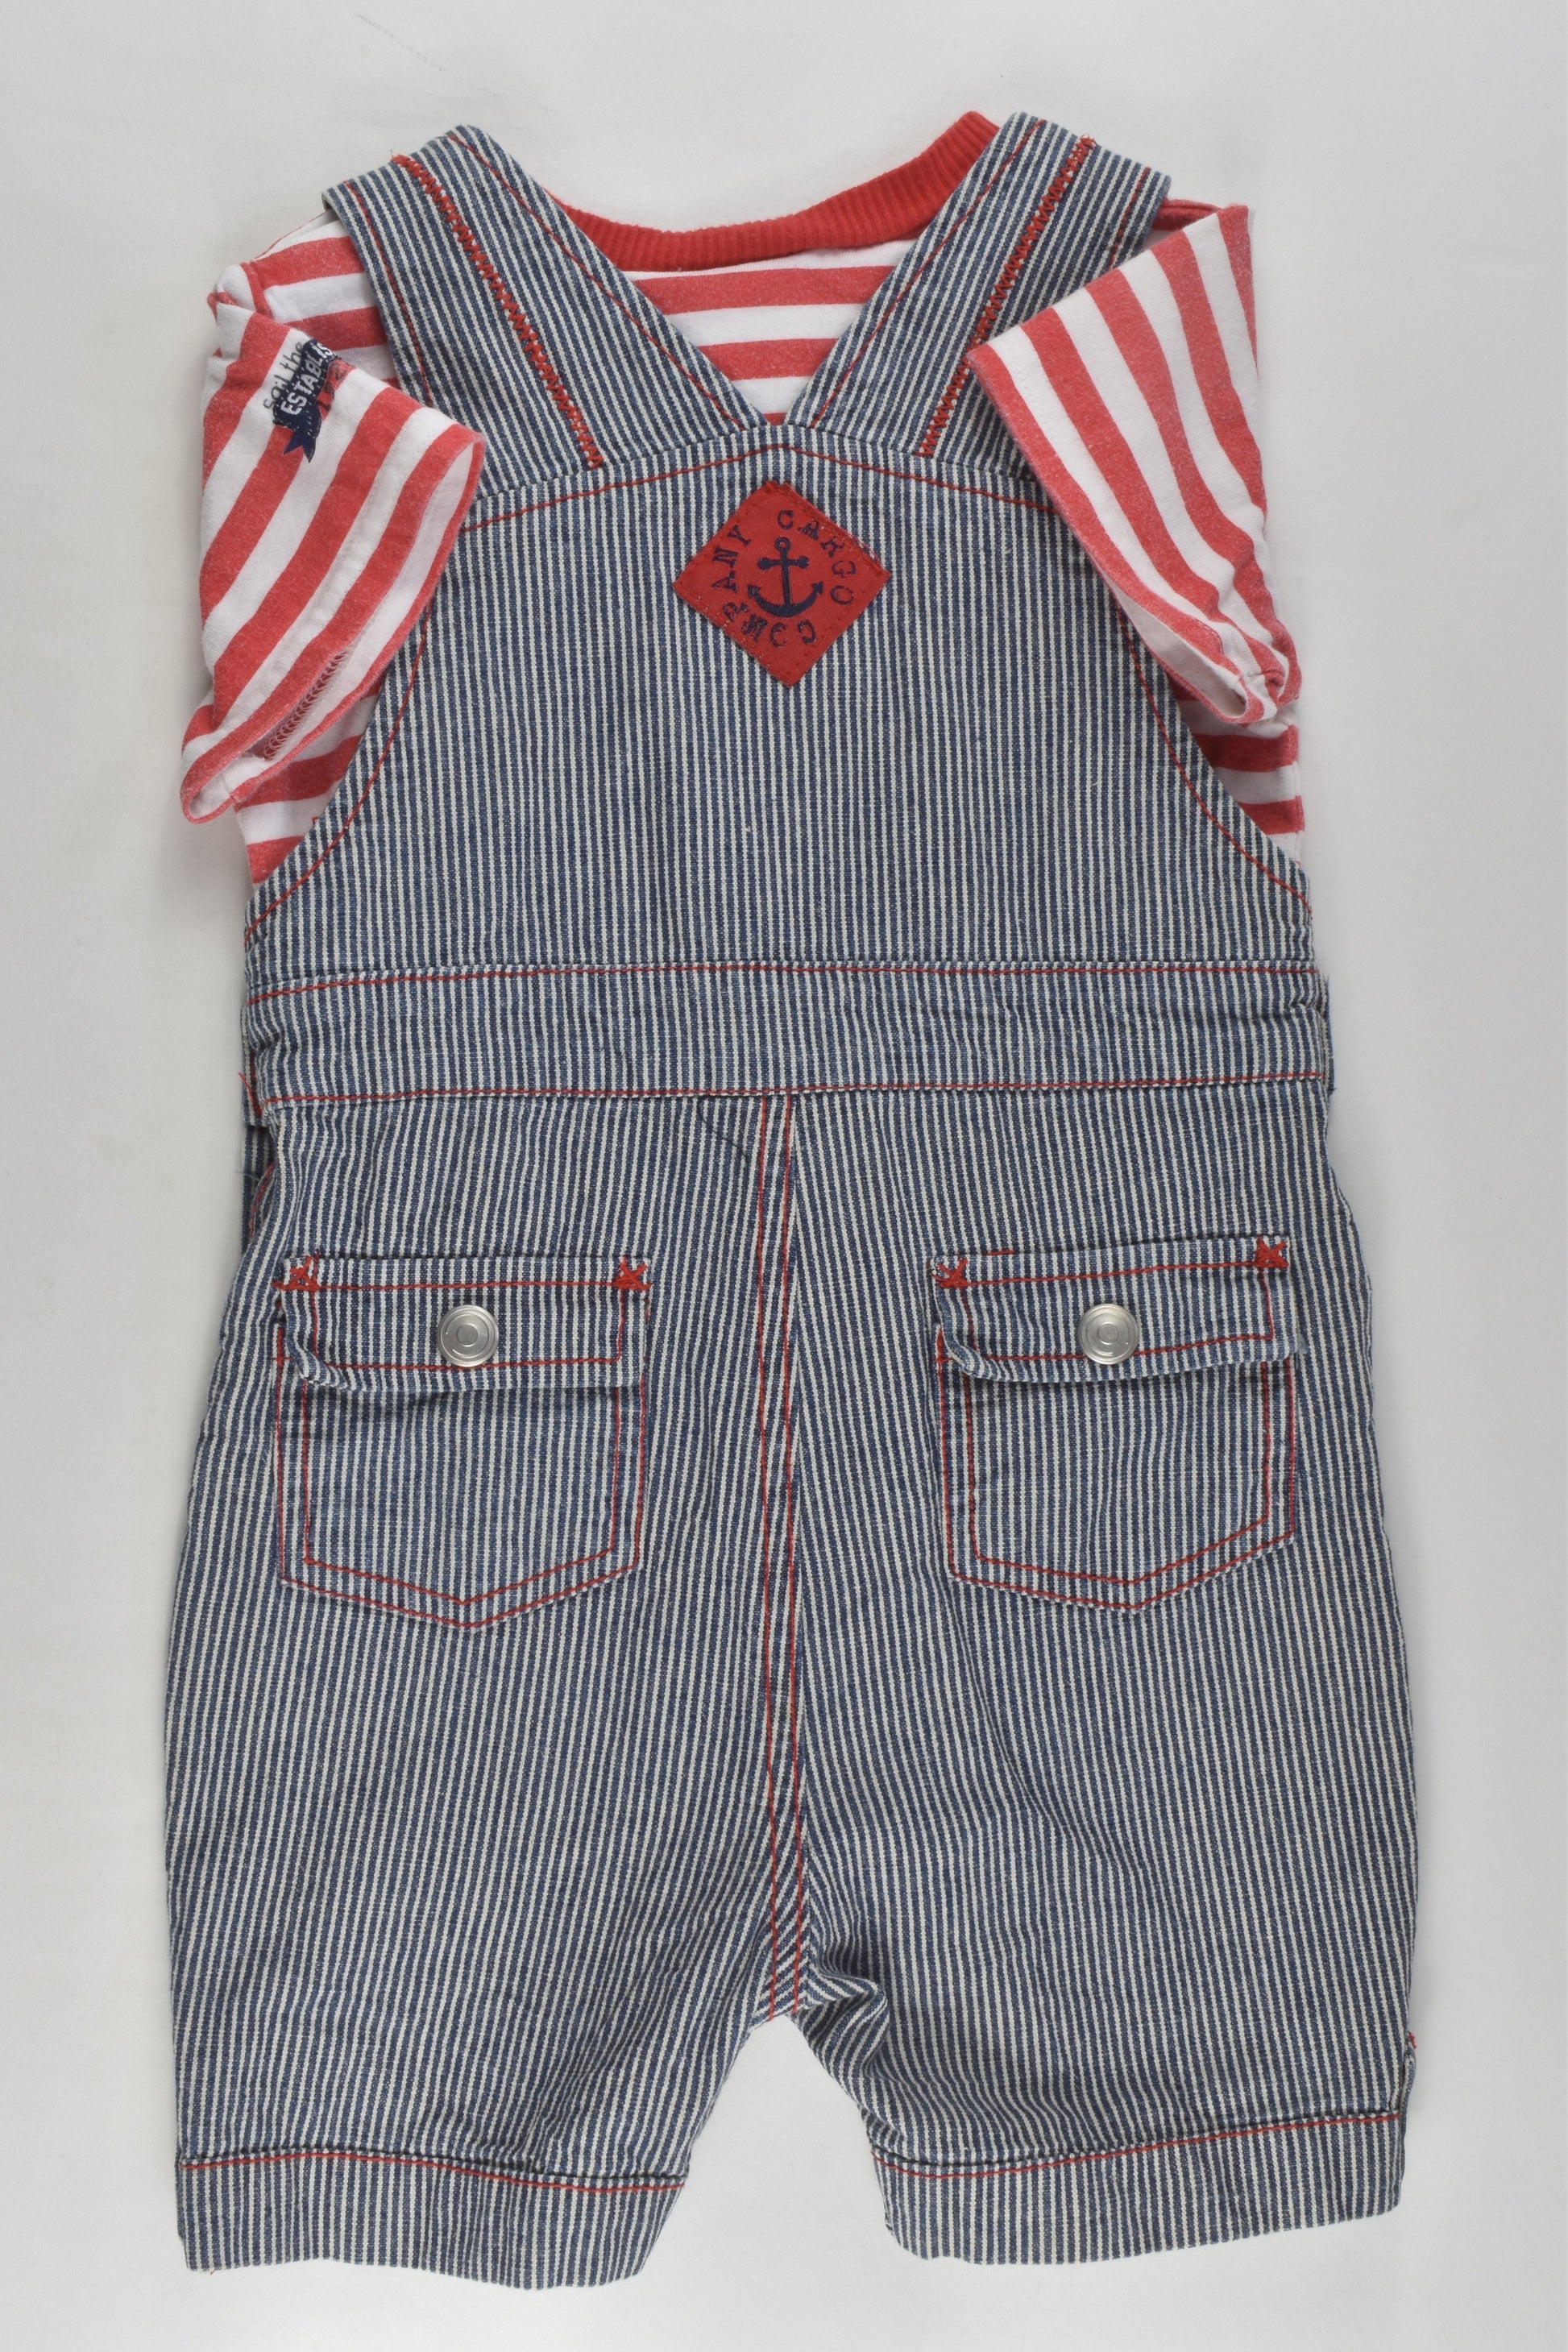 Rock a Bye Baby Boutique Size 1 (12-18 months) Nautical Outfit